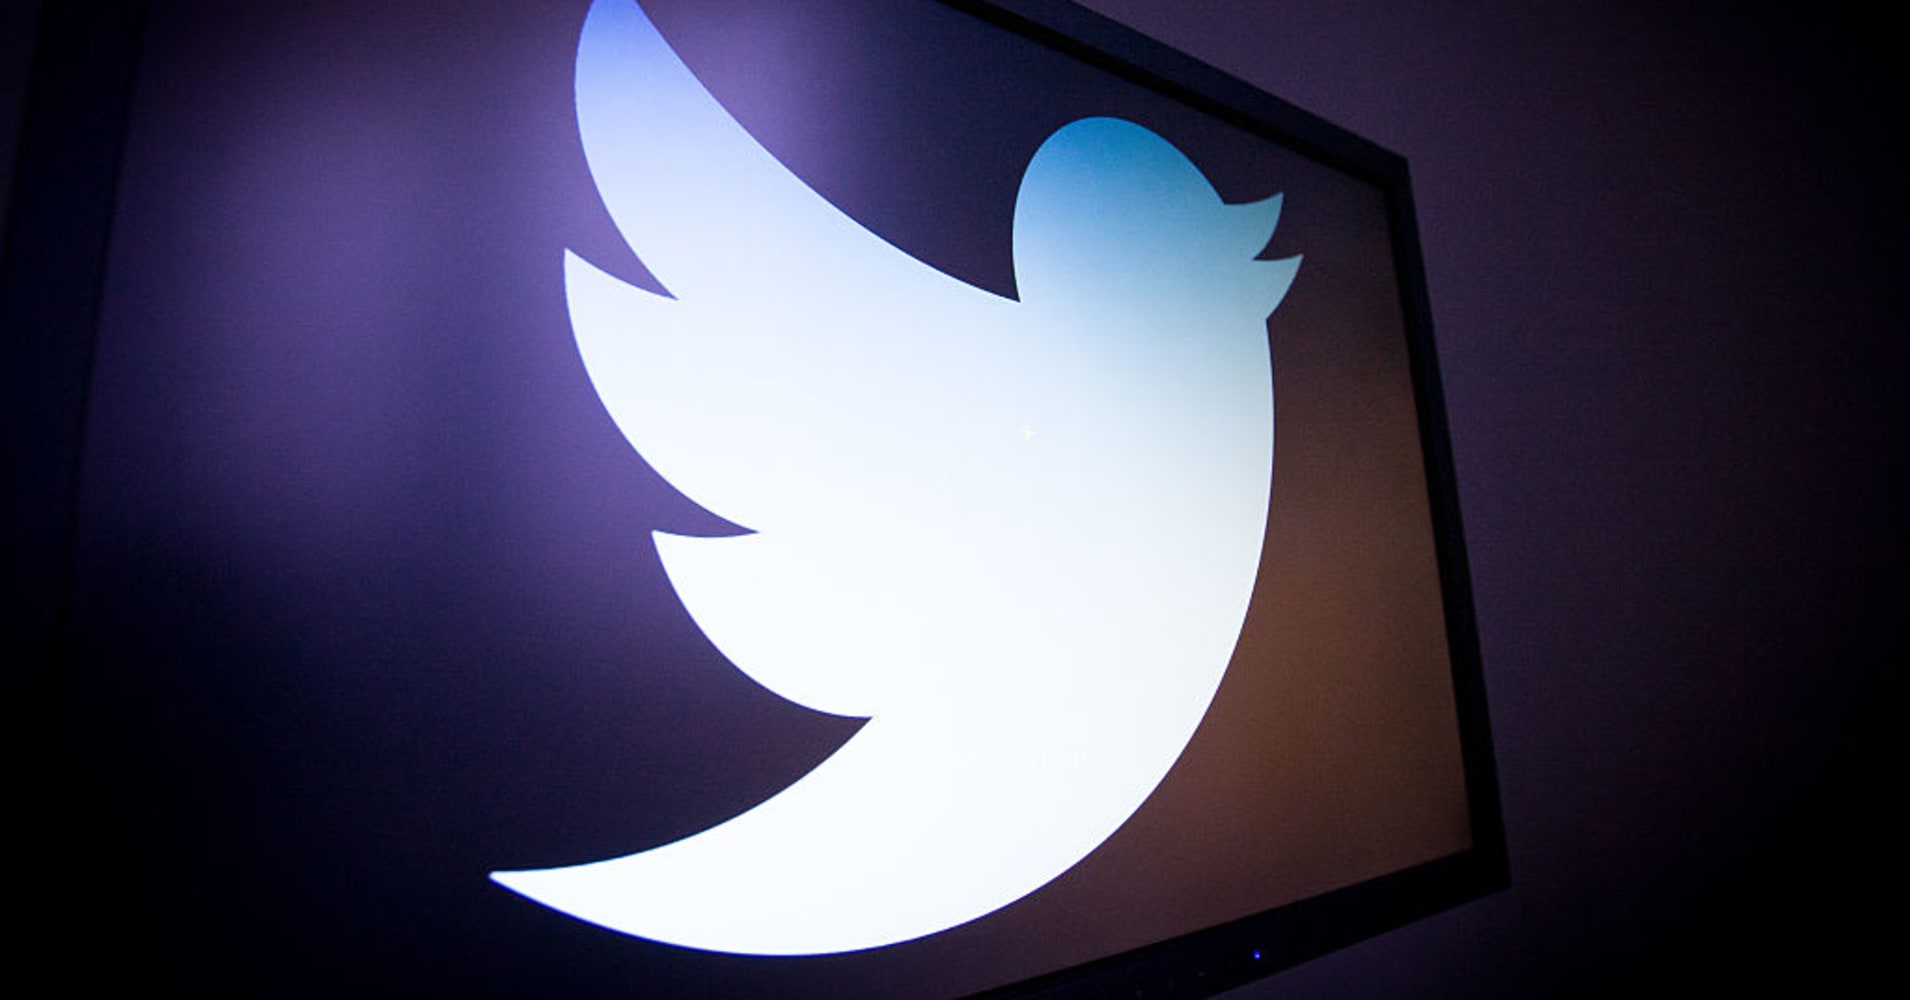 Justice Department charges two former twitter employees with spying over Saudi Arabia